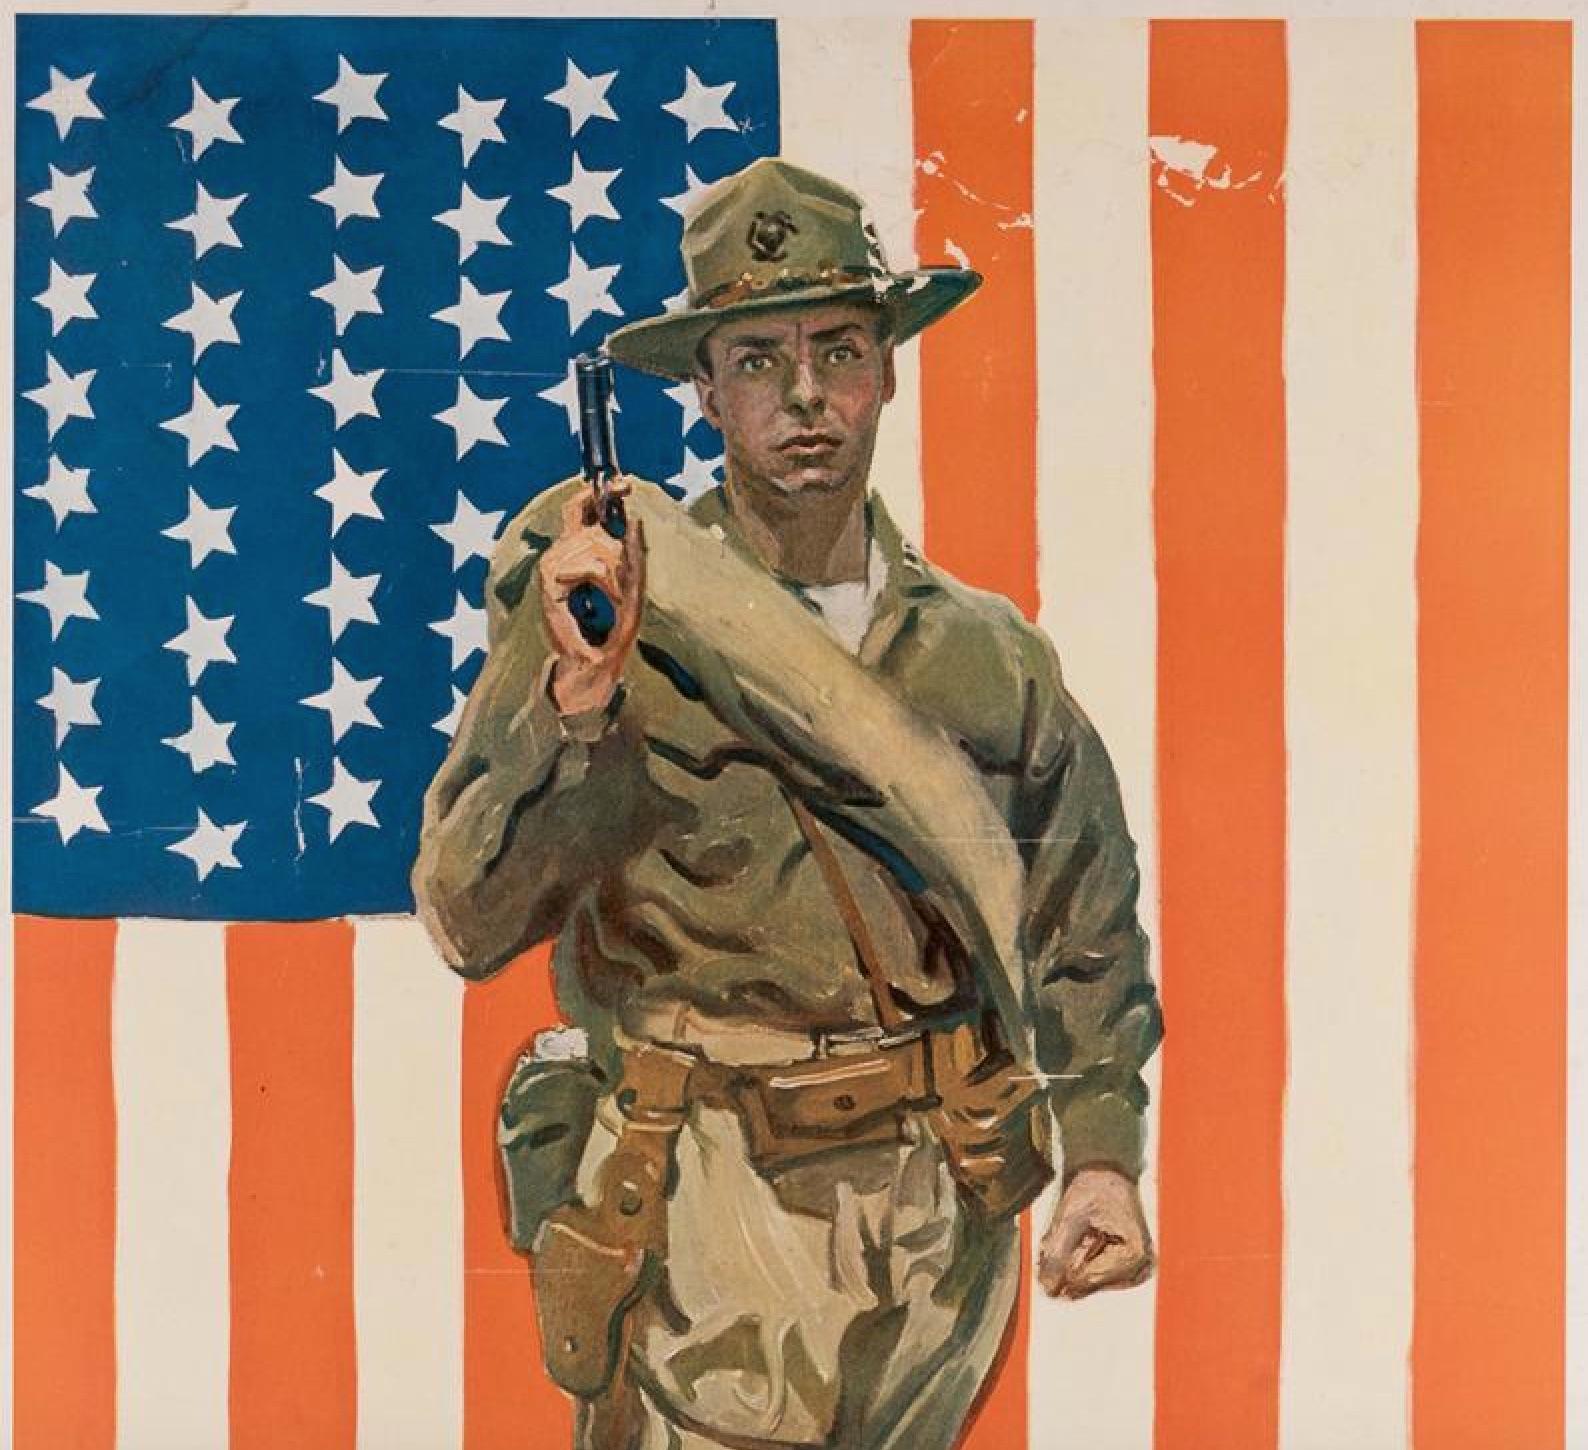 This 1918 Marines recruitment poster was designed by the famed poster artist, James Montgomery Flagg. Equally persuasive as his iconic 